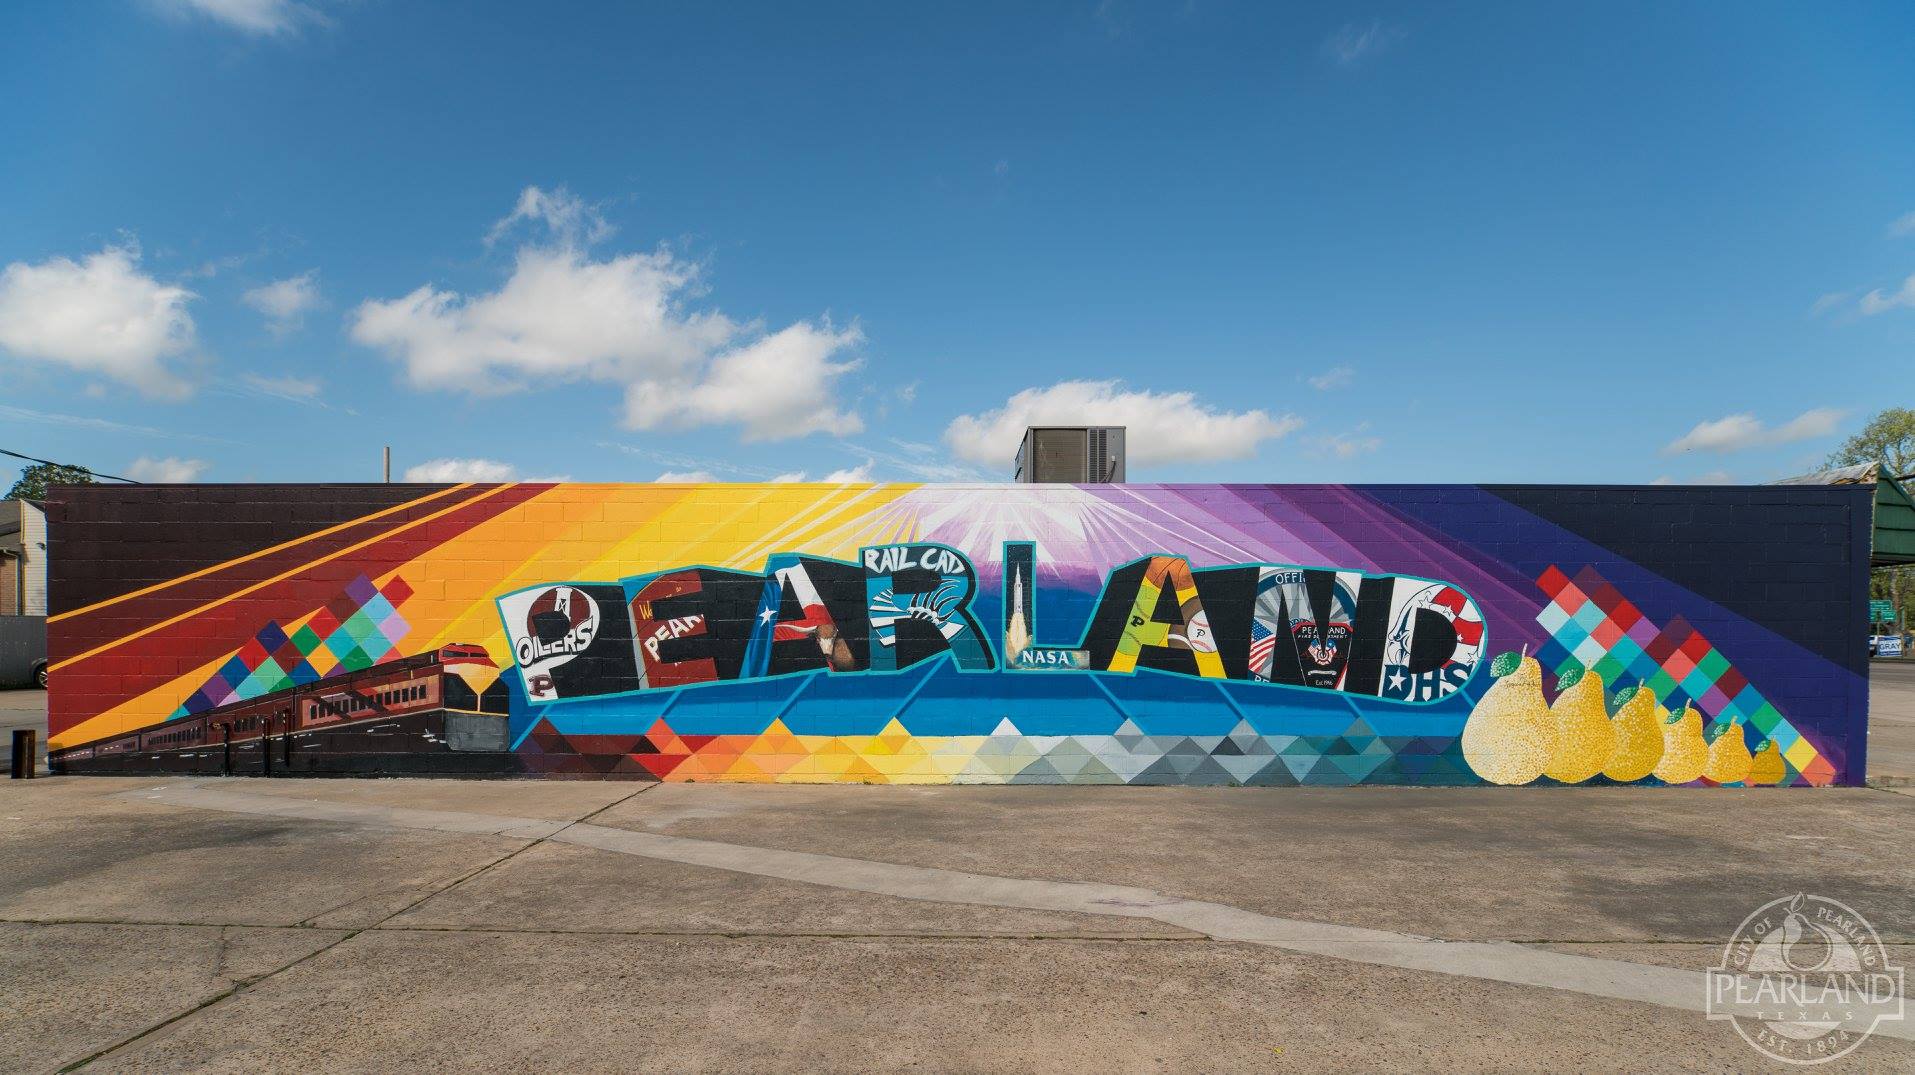 Pearland steps up its Instagram game with catchy new mural - Houston Chronicle1915 x 1075